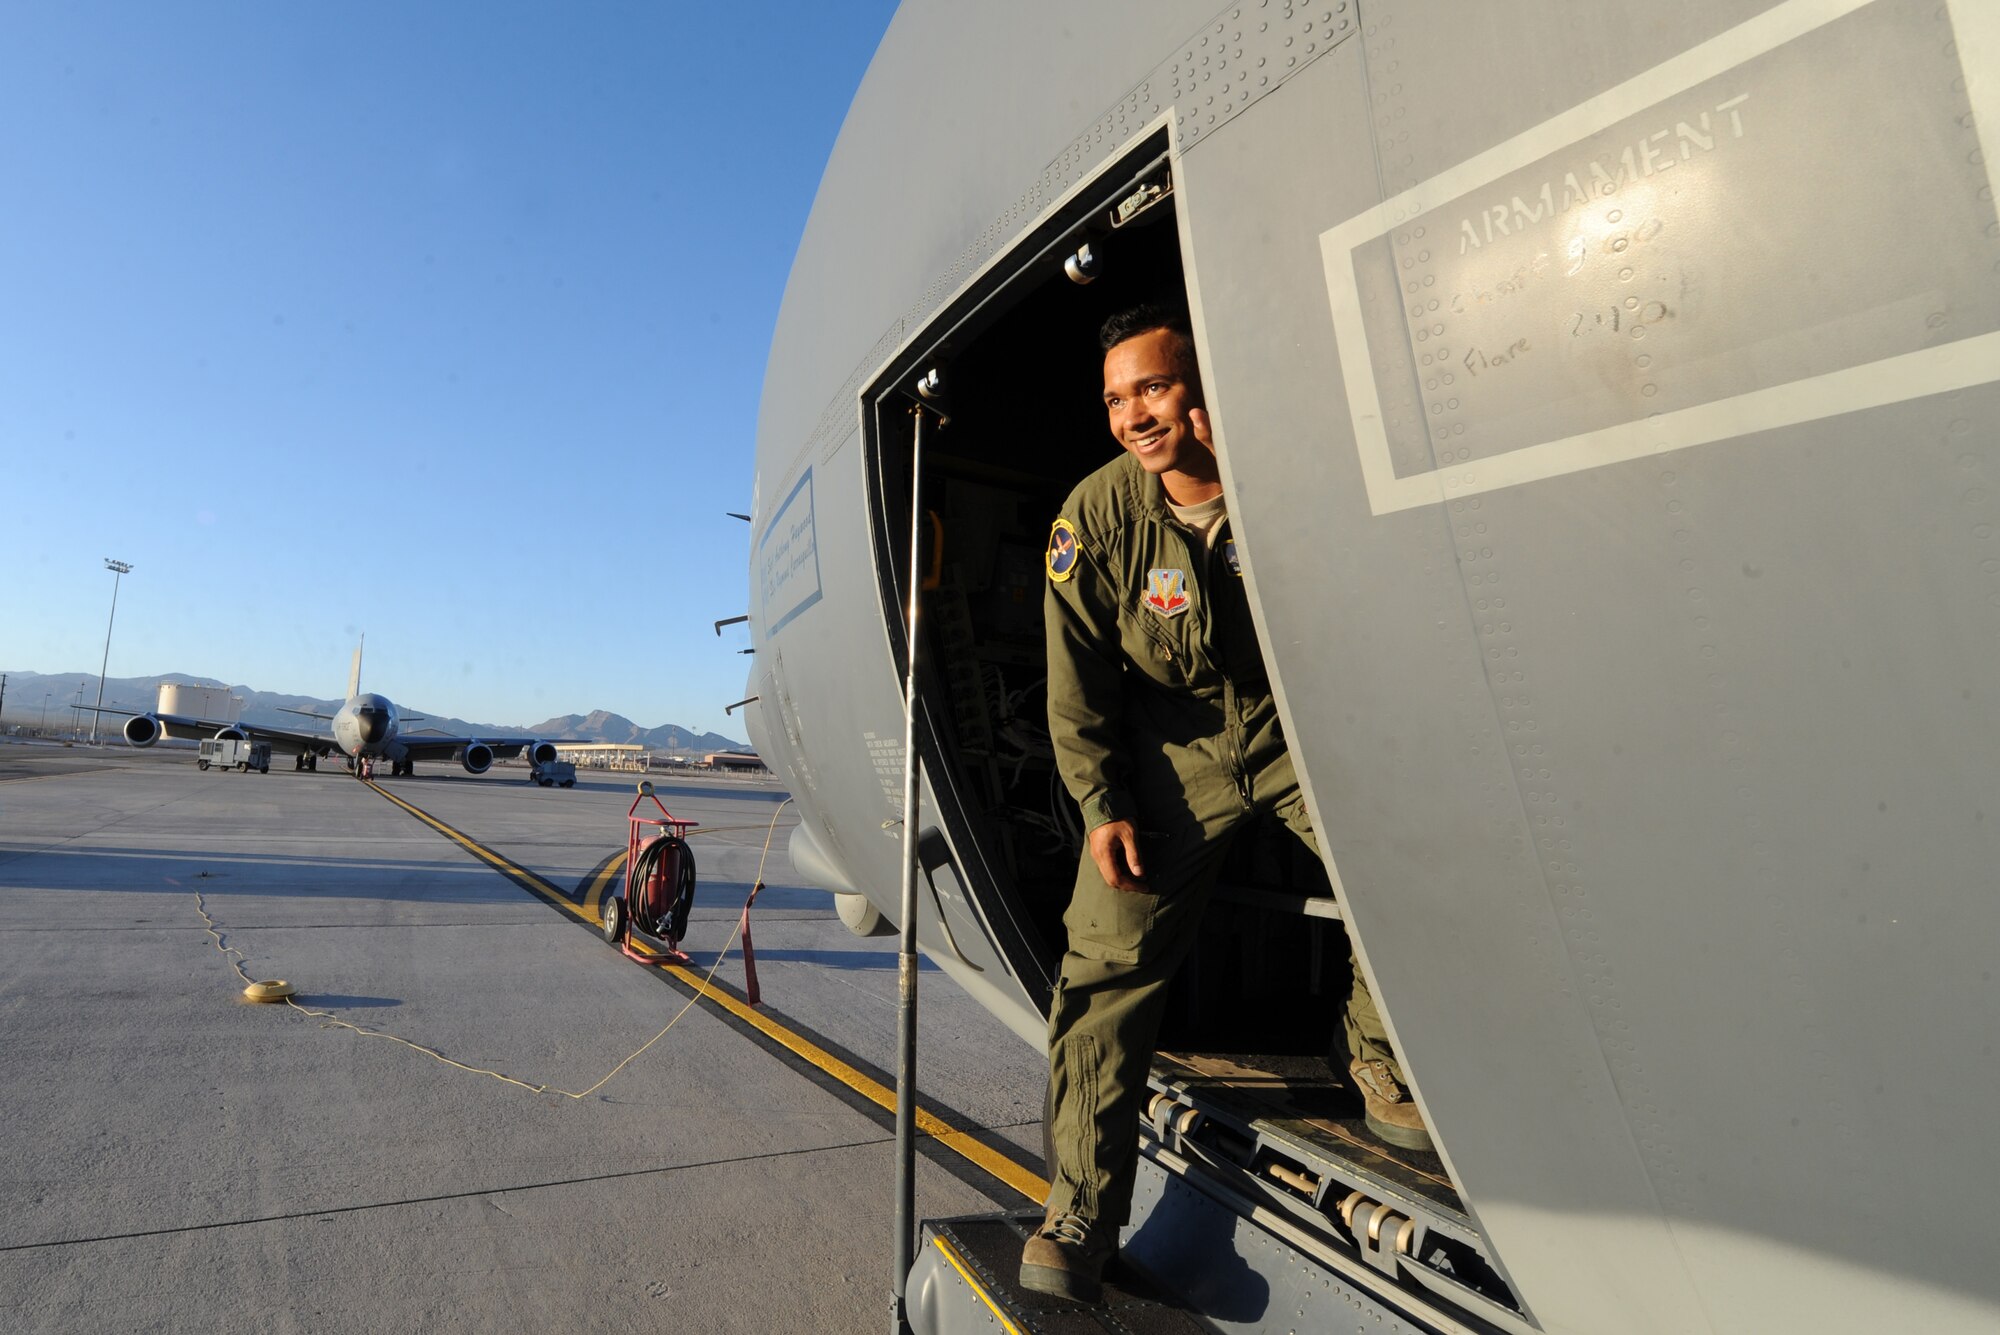 Senior Airman Frankie Harper, a loadmaster assigned to the 79th Rescue Squadron, Davis-Monthan Air Force Base, Ariz., performs pre-flight checks on an HC-130J Combat King II prior to a Red Flag 16-3 night training mission July 13, 2016 at Nellis AFB, Nev. HC-130J crews normally fly night at low to medium altitude levels in contested or sensitive environments, both over land or overwater. Crews use night vision goggles for tactical flight profiles to avoid detection to accomplish covert infiltration/exfiltration and transload operations. . (U.S. Air Force photo by Senior Airman Joshua Kleinholz/Released)